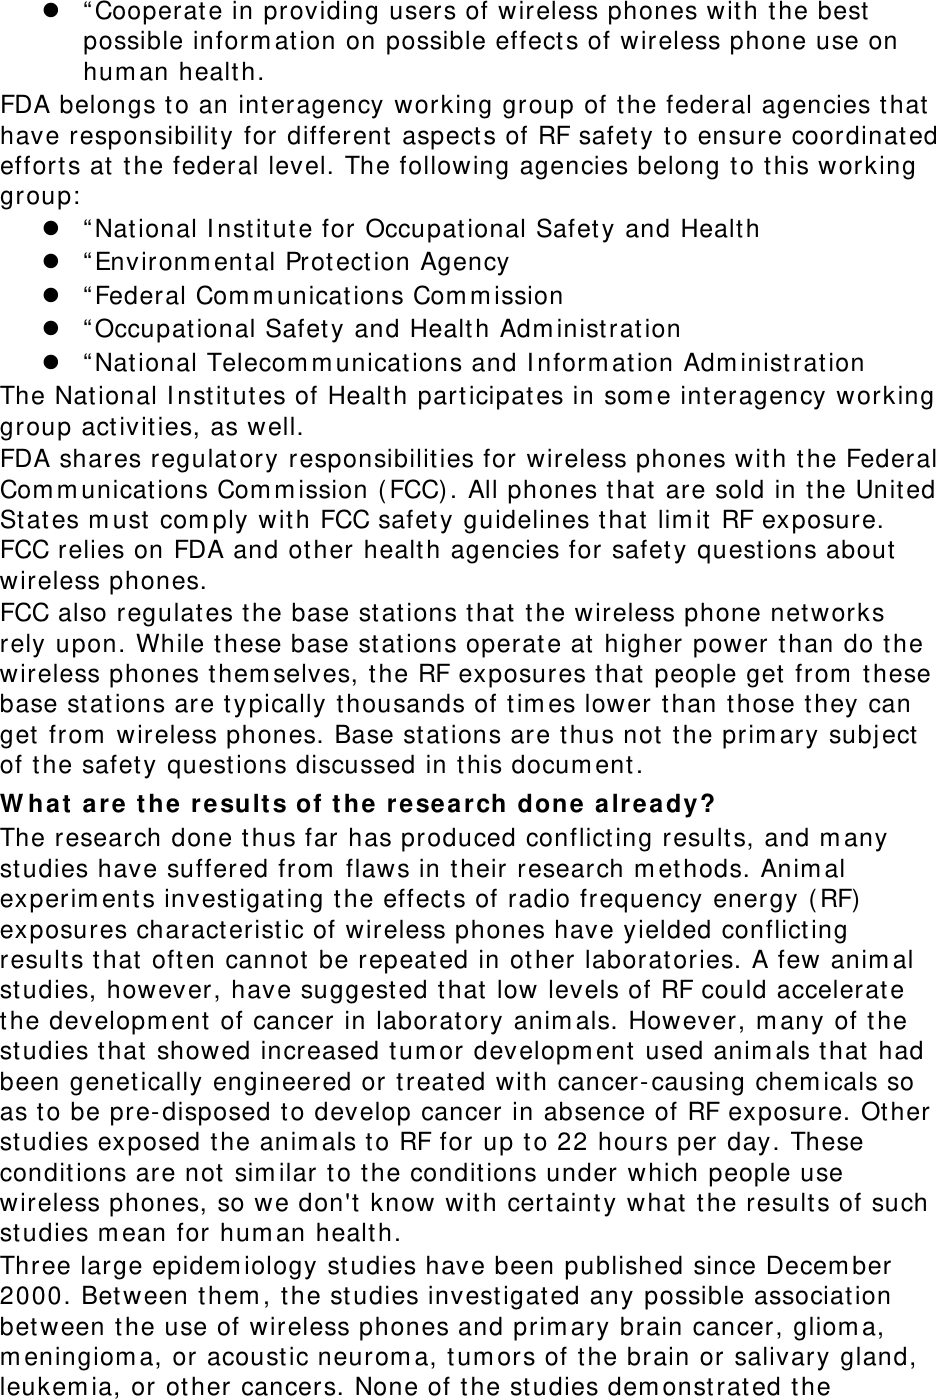  “ Cooperat e in providing users of wireless phones wit h the best  possible inform ation on possible effect s of wireless phone use on hum an health. FDA belongs t o an interagency working group of t he federal agencies that  have responsibilit y for different  aspect s of RF safety to ensure coordinated effort s at the federal level. The following agencies belong t o this working group:   “ Nat ional I nstit ut e for Occupational Safety and Health  “ Environm ent al Protect ion Agency  “ Federal Com m unications Com m ission  “ Occupat ional Safet y and Healt h Adm inist ration  “ Nat ional Telecom m unicat ions and I nform ation Adm inist rat ion The National I nst itutes of Healt h participates in som e int eragency working group act ivities, as well. FDA shares regulatory responsibilities for wireless phones with t he Federal Com m unications Com m ission ( FCC). All phones that are sold in t he United St ates m ust com ply wit h FCC safety guidelines that lim it RF exposure. FCC relies on FDA and other health agencies for safety quest ions about wireless phones. FCC also regulates t he base st at ions t hat  t he wireless phone networks rely upon. While t hese base st ations operat e at  higher power t han do t he wireless phones t hem selves, the RF exposures that  people get from  t hese base st at ions are t ypically t housands of tim es lower than t hose they can get from  wireless phones. Base st at ions are thus not  t he prim ary subject of t he safety quest ions discussed in t his docum ent . W ha t  are the r esult s of t he rese arch done  already? The research done thus far has produced conflict ing result s, and m any studies have suffered from  flaws in their research m ethods. Anim al experim ent s invest igating t he effect s of radio frequency energy (RF)  exposures charact erist ic of wireless phones have yielded conflict ing results that oft en cannot be repeated in ot her laborat ories. A few anim al studies, however, have suggest ed t hat low levels of RF could accelerate the developm ent  of cancer in laboratory anim als. However, m any of t he studies that showed increased t um or developm ent  used anim als that had been genetically engineered or treat ed wit h cancer-causing chem icals so as t o be pre- disposed t o develop cancer in absence of RF exposure. Ot her studies exposed t he anim als to RF for up to 22 hours per day. These condit ions are not  sim ilar t o t he condit ions under which people use wireless phones, so we don&apos;t know with certainty what  t he results of such studies m ean for hum an health. Three large epidem iology st udies have been published since Decem ber 2000. Between them , t he st udies invest igat ed any possible association between t he use of wireless phones and prim ary brain cancer, gliom a, m eningiom a, or acoust ic neurom a, tum ors of the brain or salivary gland, leukem ia, or other cancers. None of t he st udies dem onst rated t he 